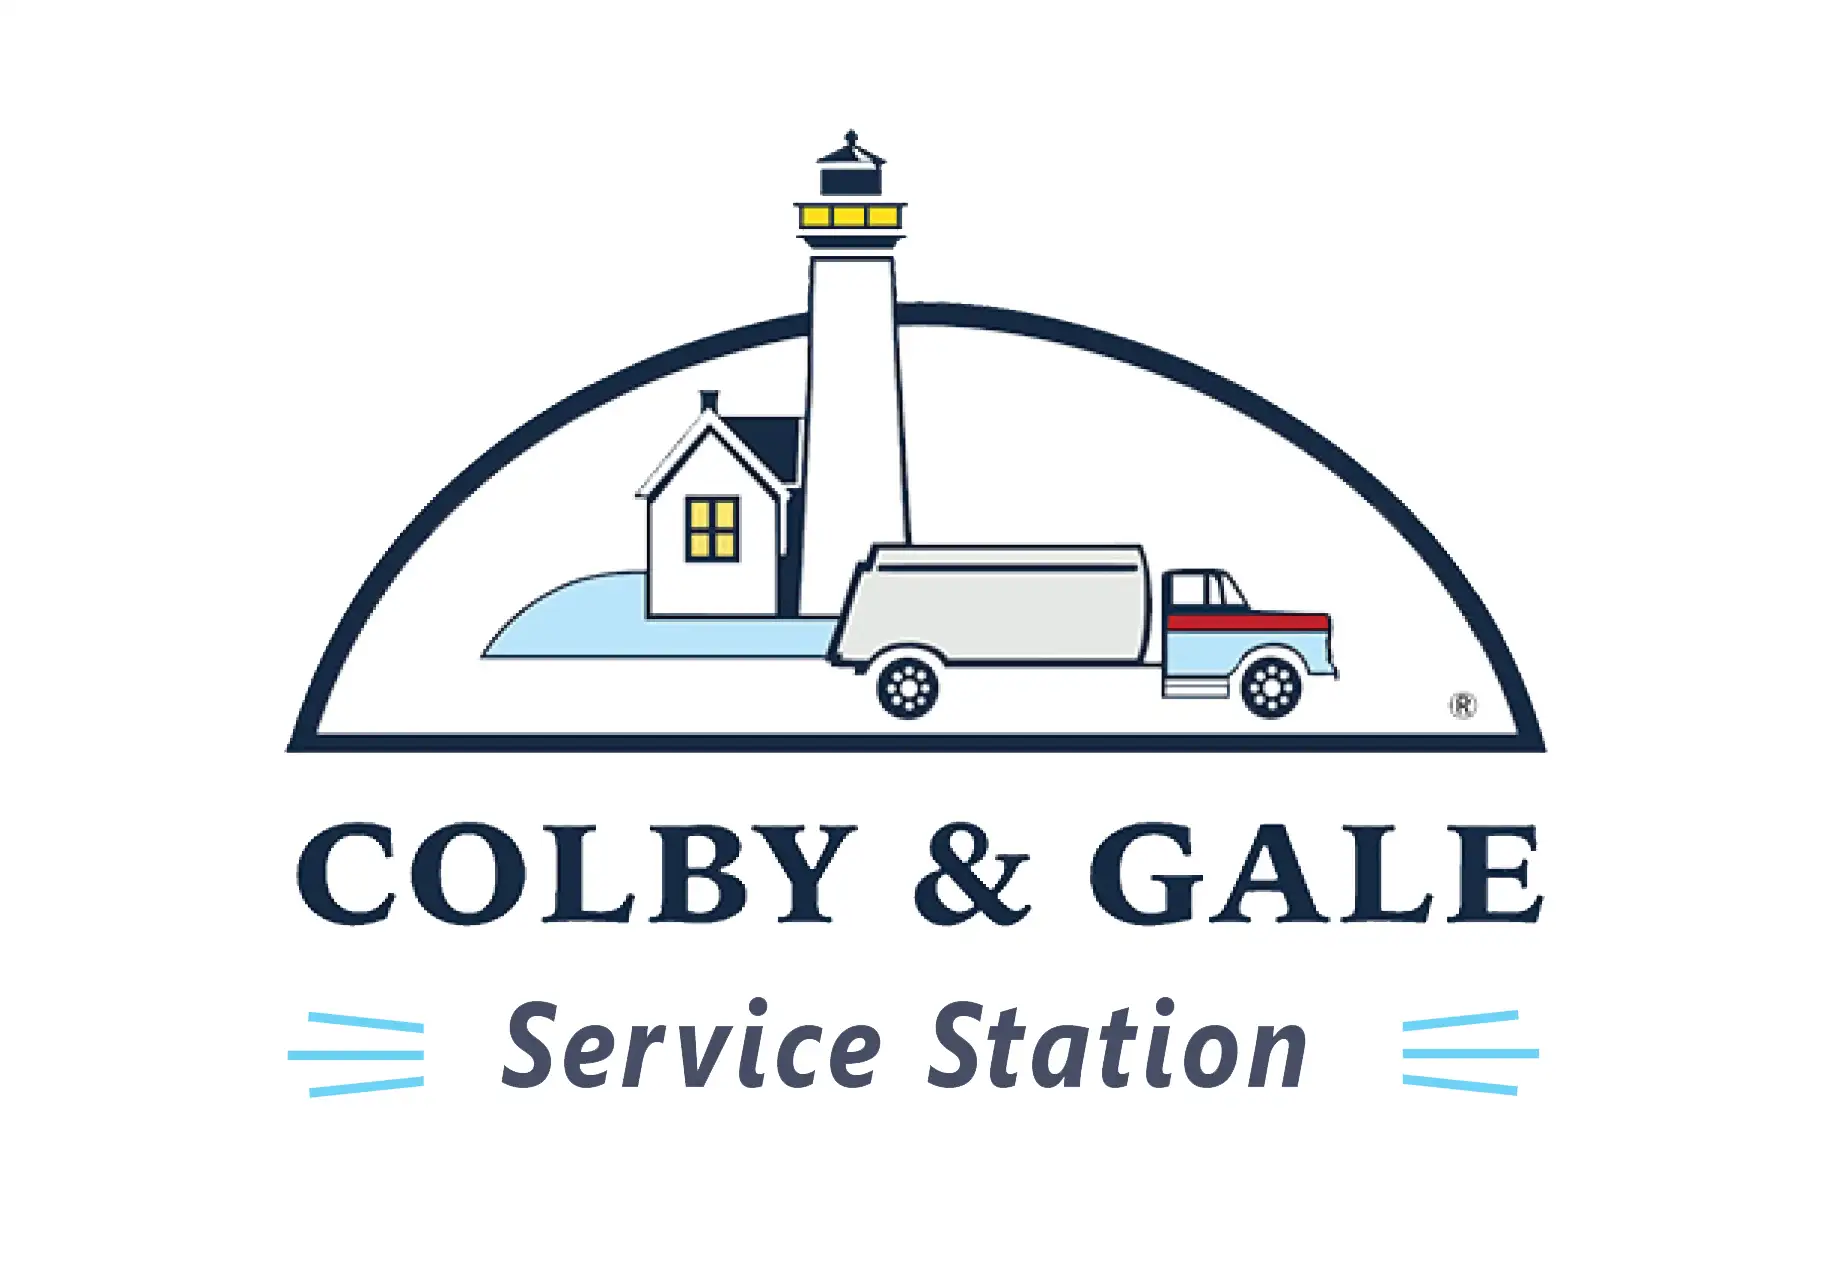 Colby & Gale Service Station